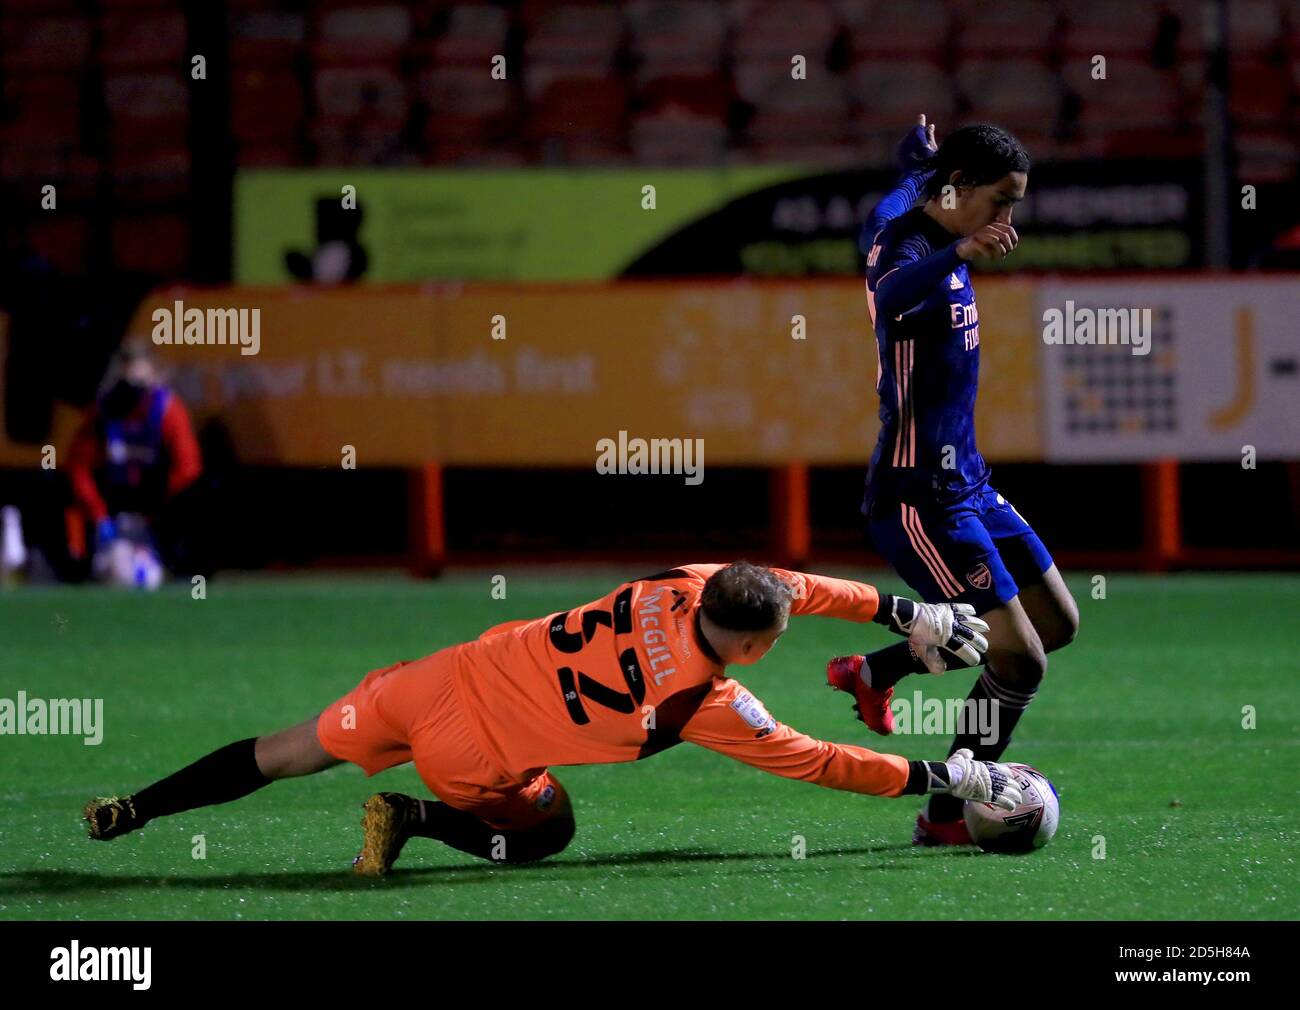 køkken Vag Myre Arsenal U21's Kido Taylor-Hart (right) gets the ball past Crawley Town  goalkeeper Thomas McGill to assist teammate Jordan McEneff (not pictured)  in scoring their sides first goal of the game during the